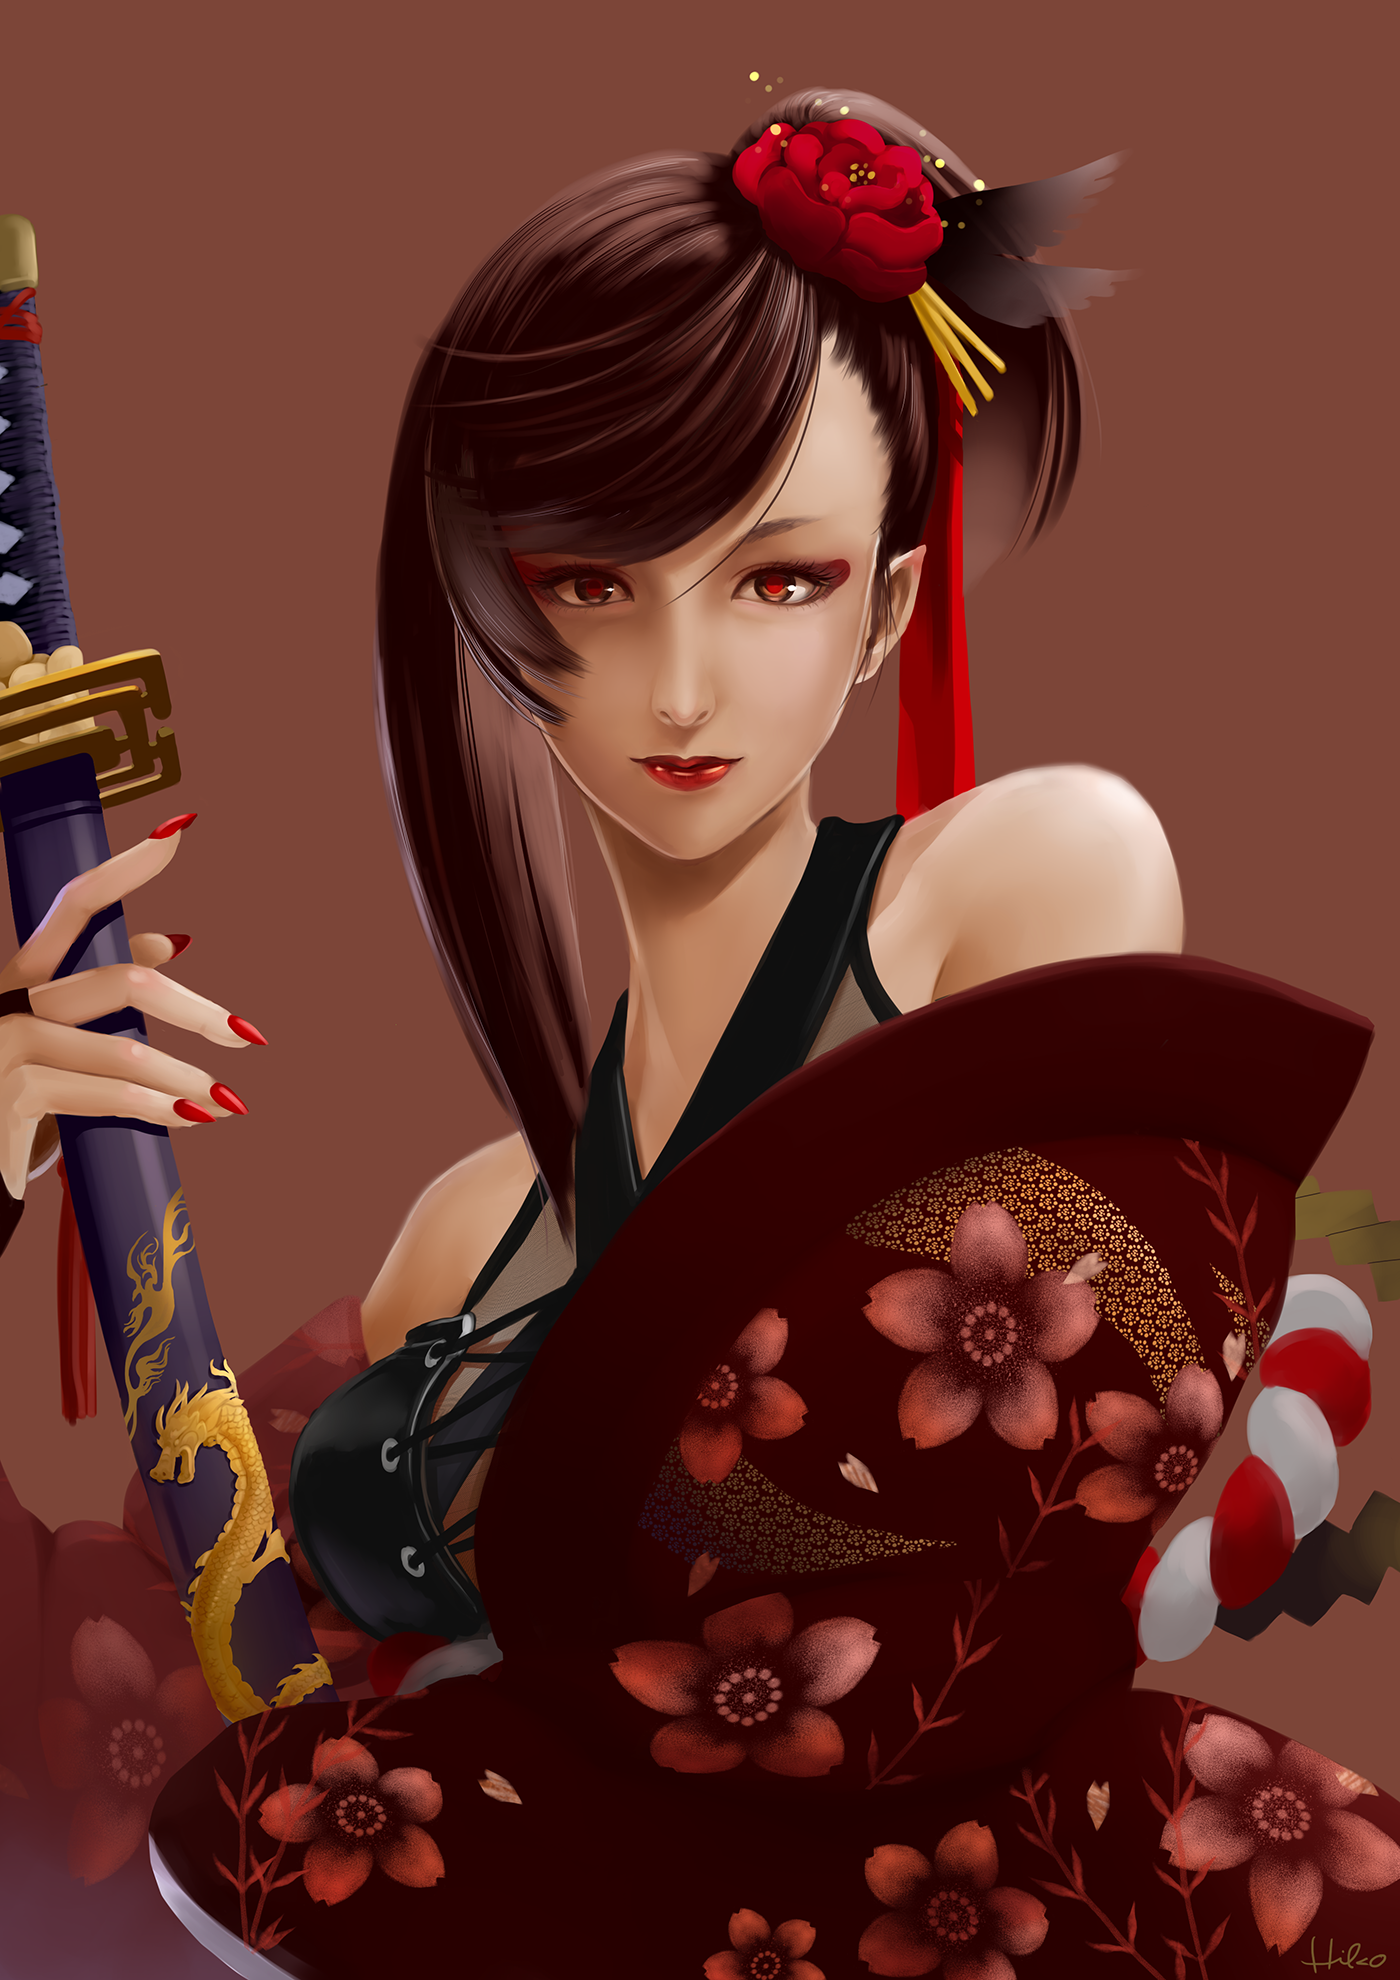 Anime 1400x1980 anime anime girls long hair red eyes katana sword Pixiv red nails red lipstick painted nails brunette simple background looking at viewer fantasy art fantasy girl